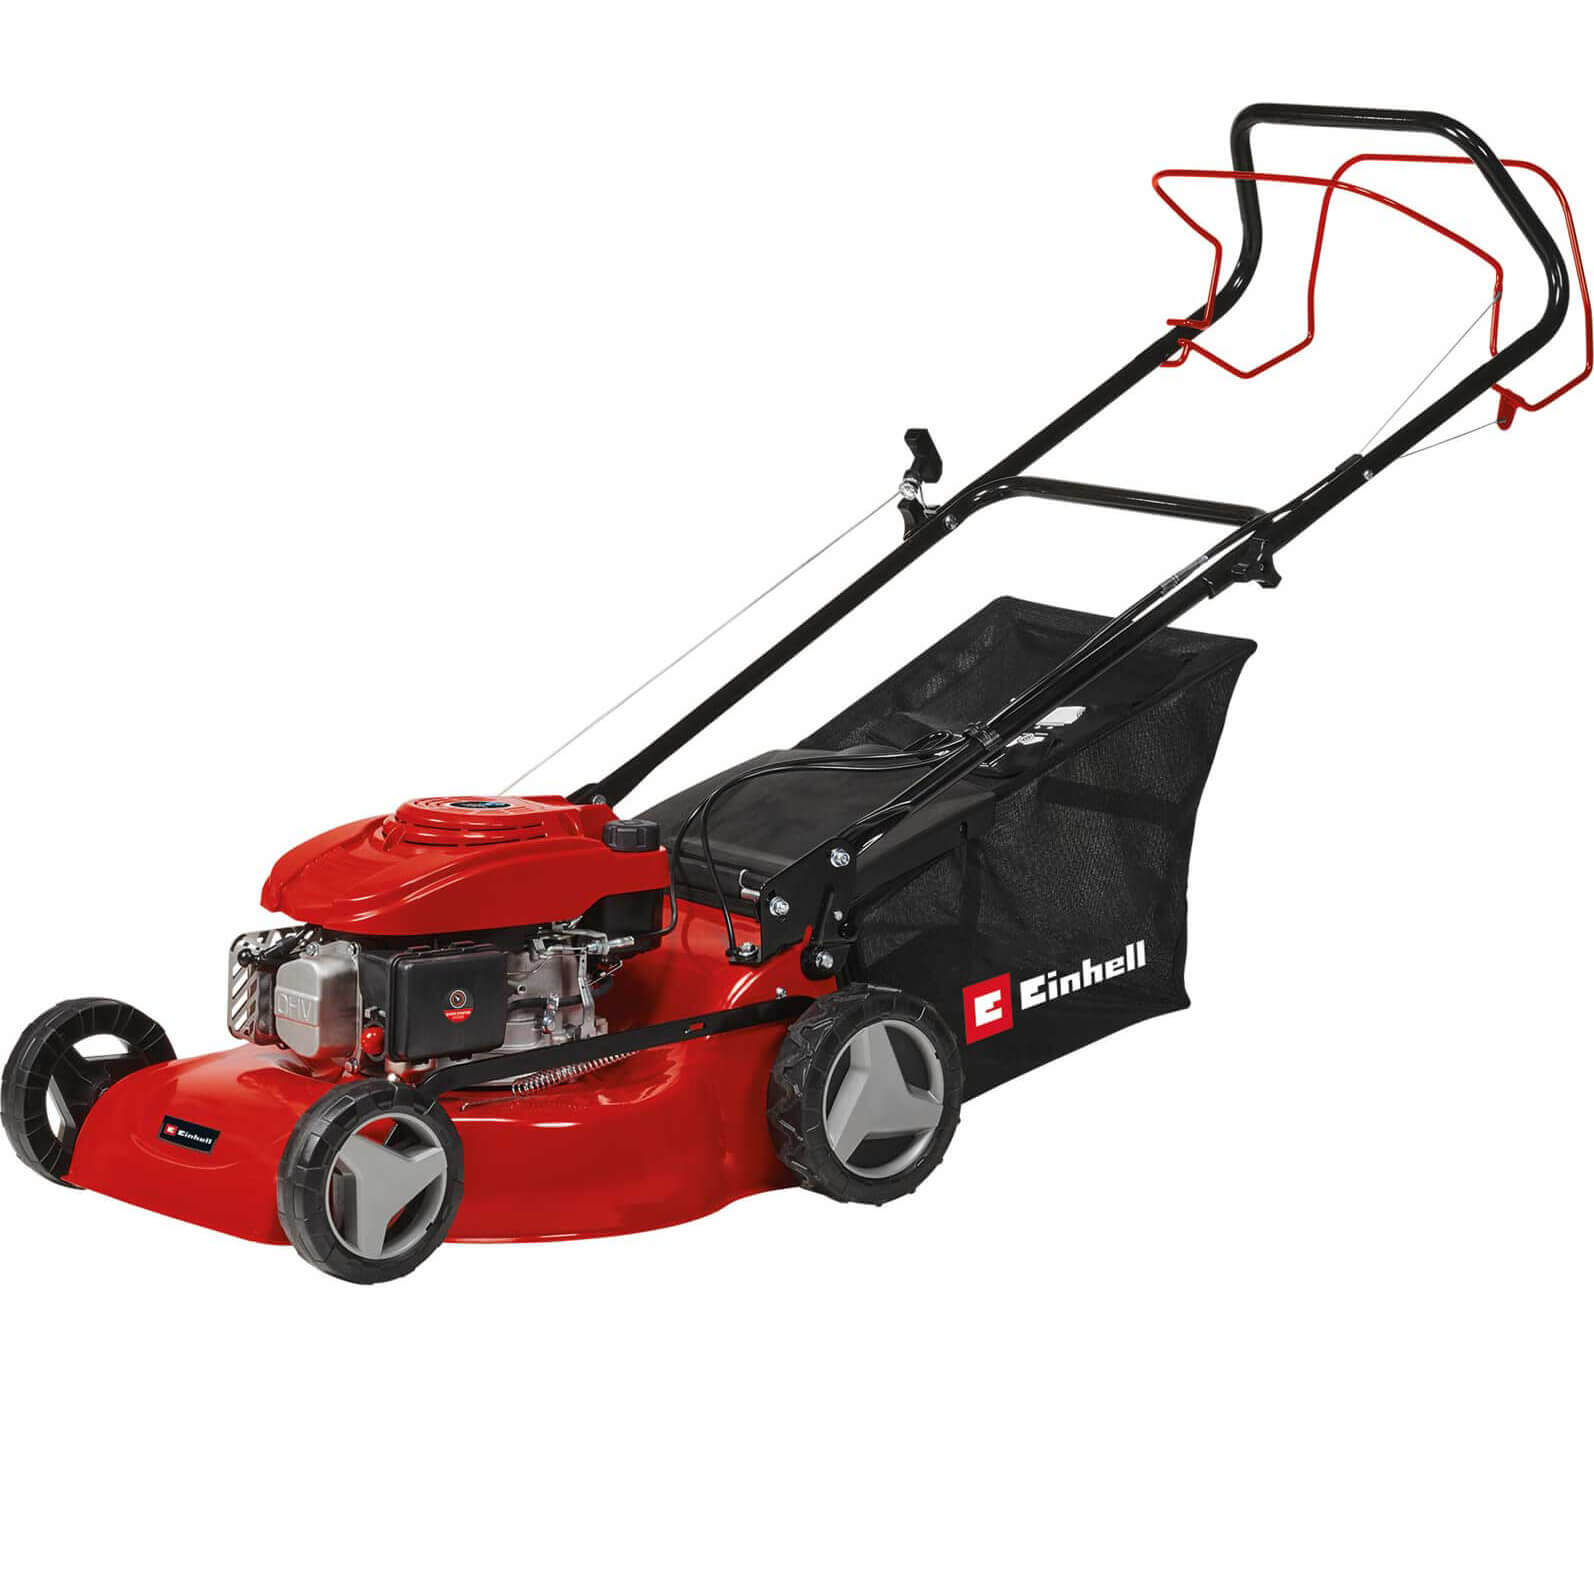 Photo of Einhell Gc-pm 46/4 S Self Propelled Petrol Lawnmower 460mm